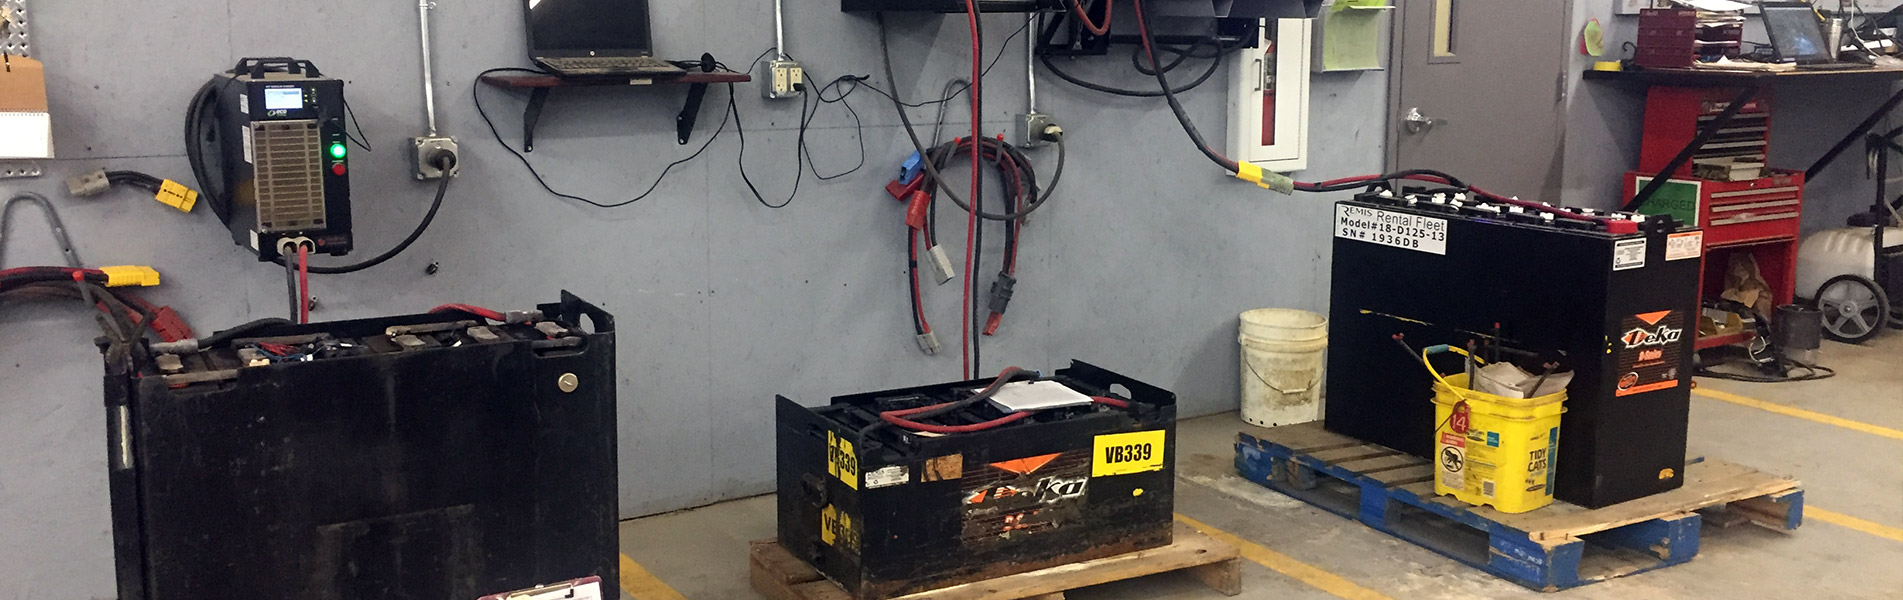 Industrial Battery Charger Repair Jefferson Wi Remis Power Systems Inc